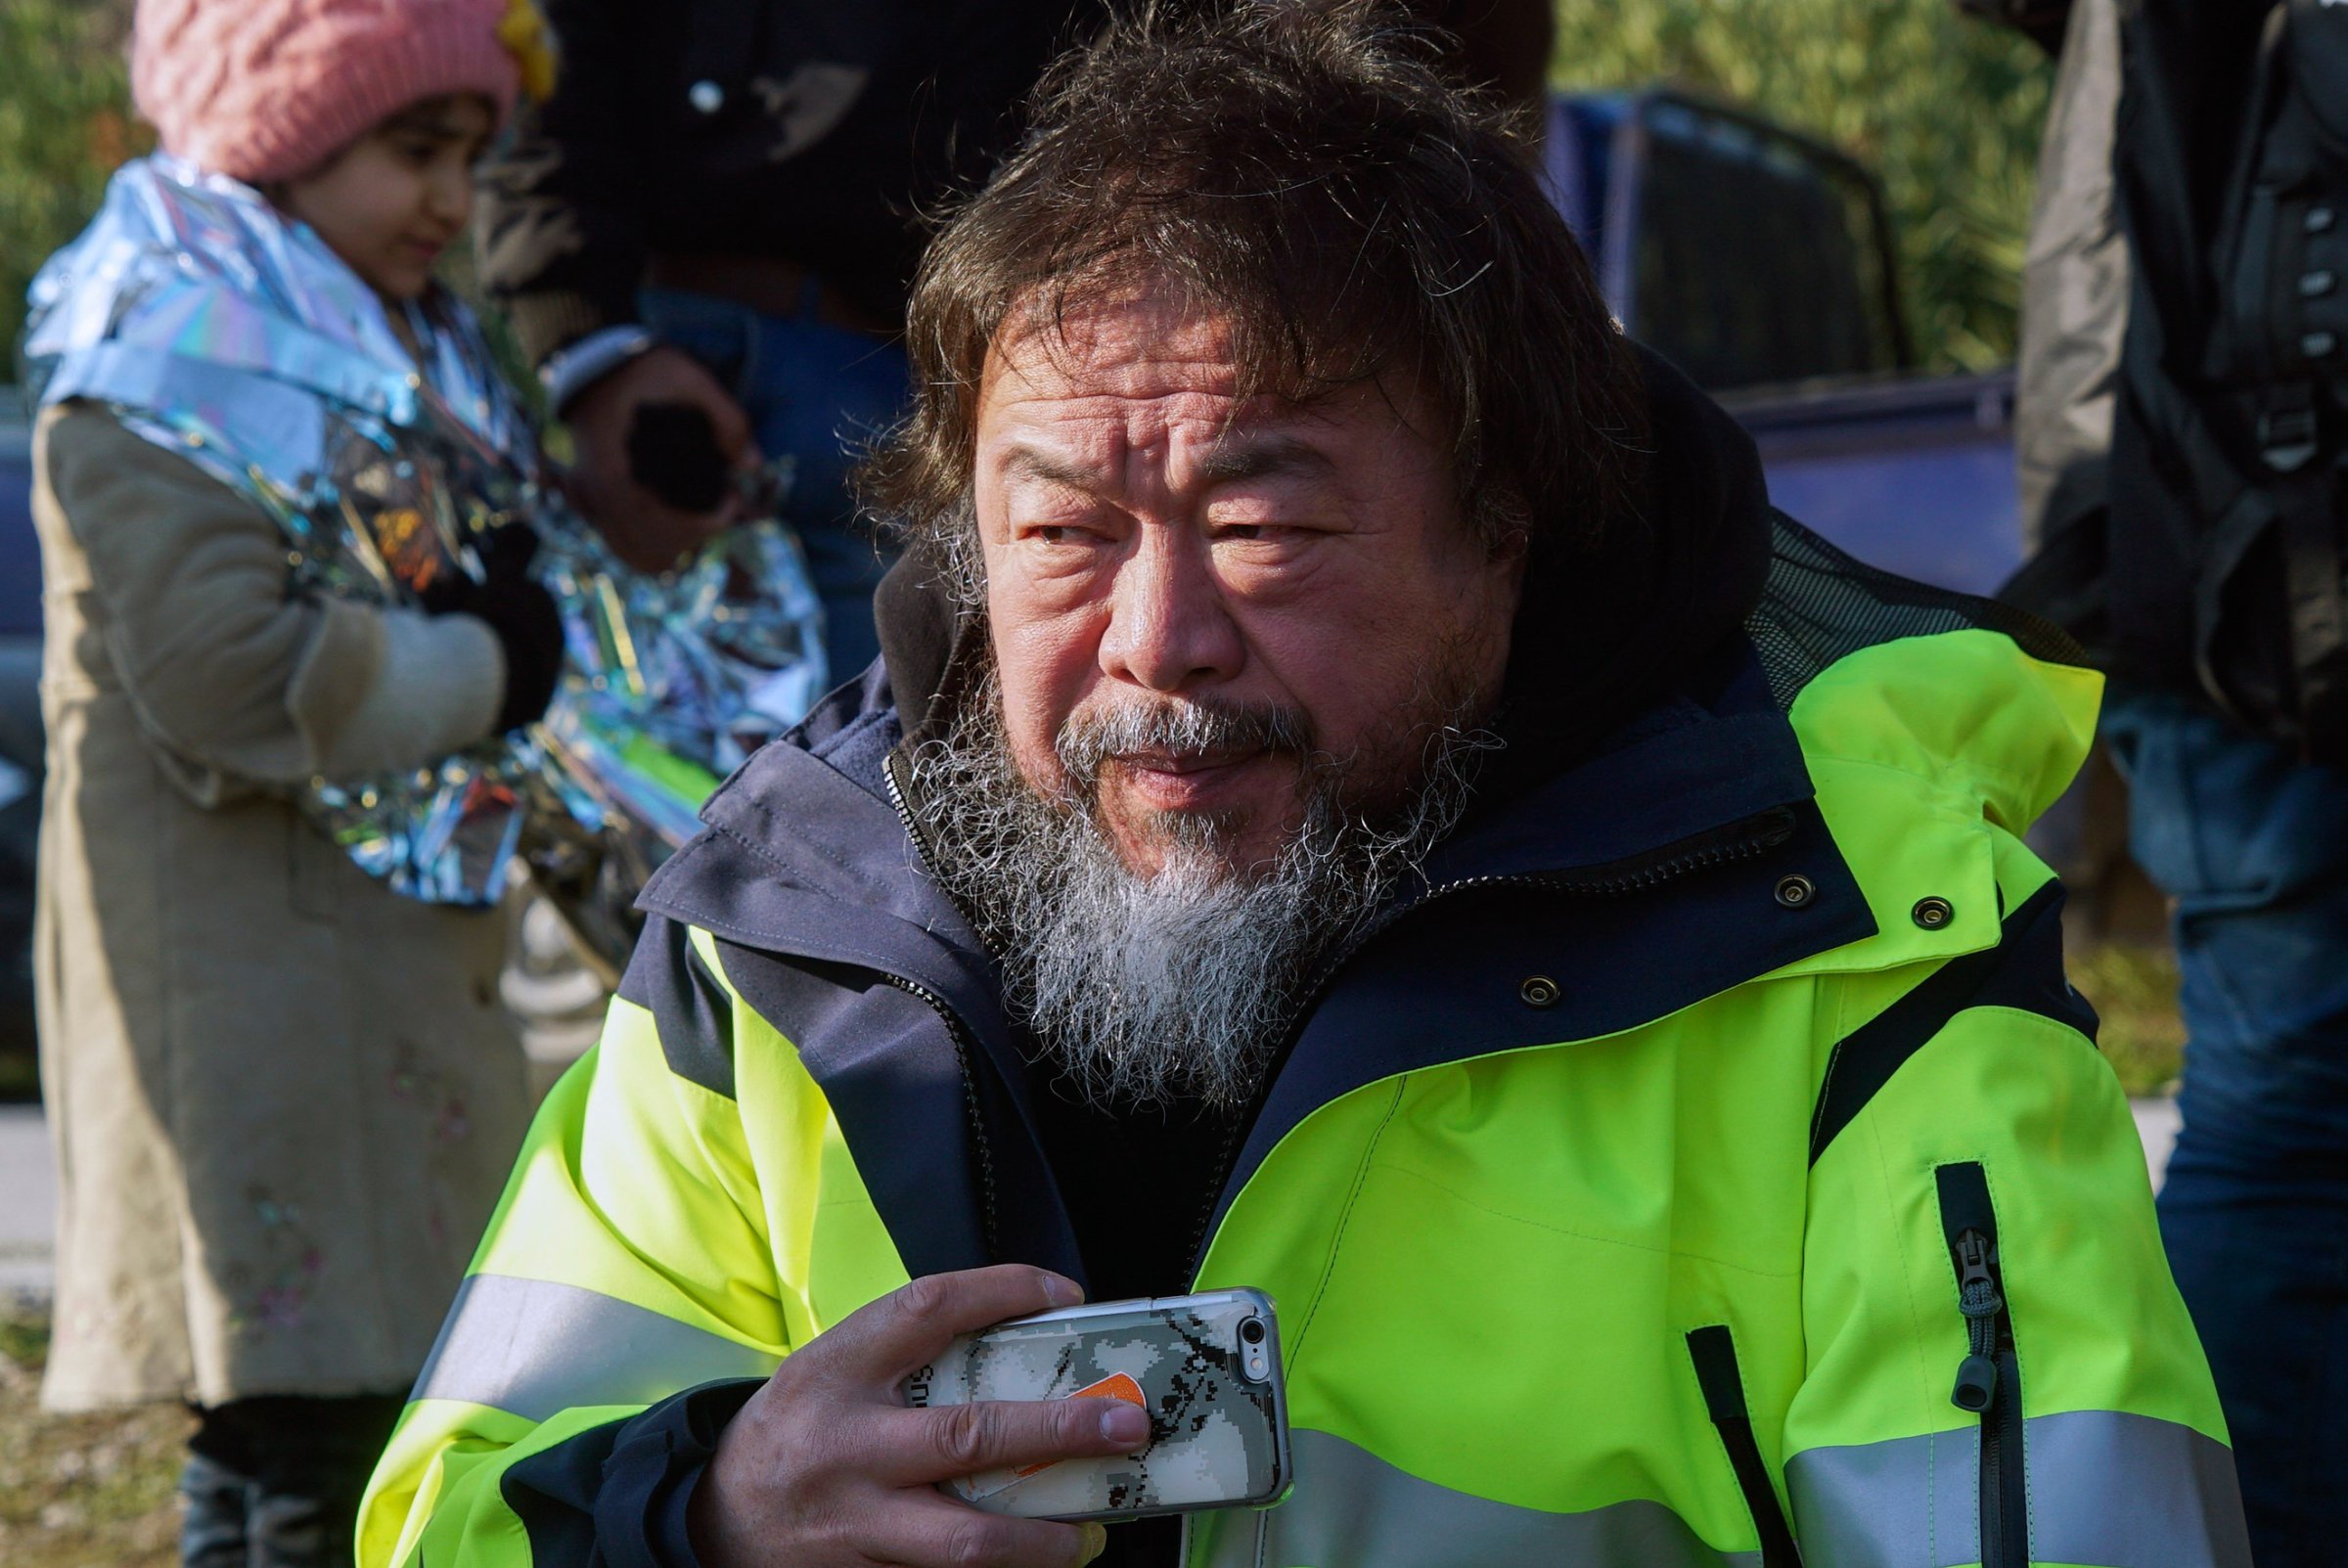 Chinese activist and artist Ai Weiwei assists refugees and migrants after their arrival from the Turkish coast to a beach on the Greek island of Lesbos, Jan. 28, 2016.